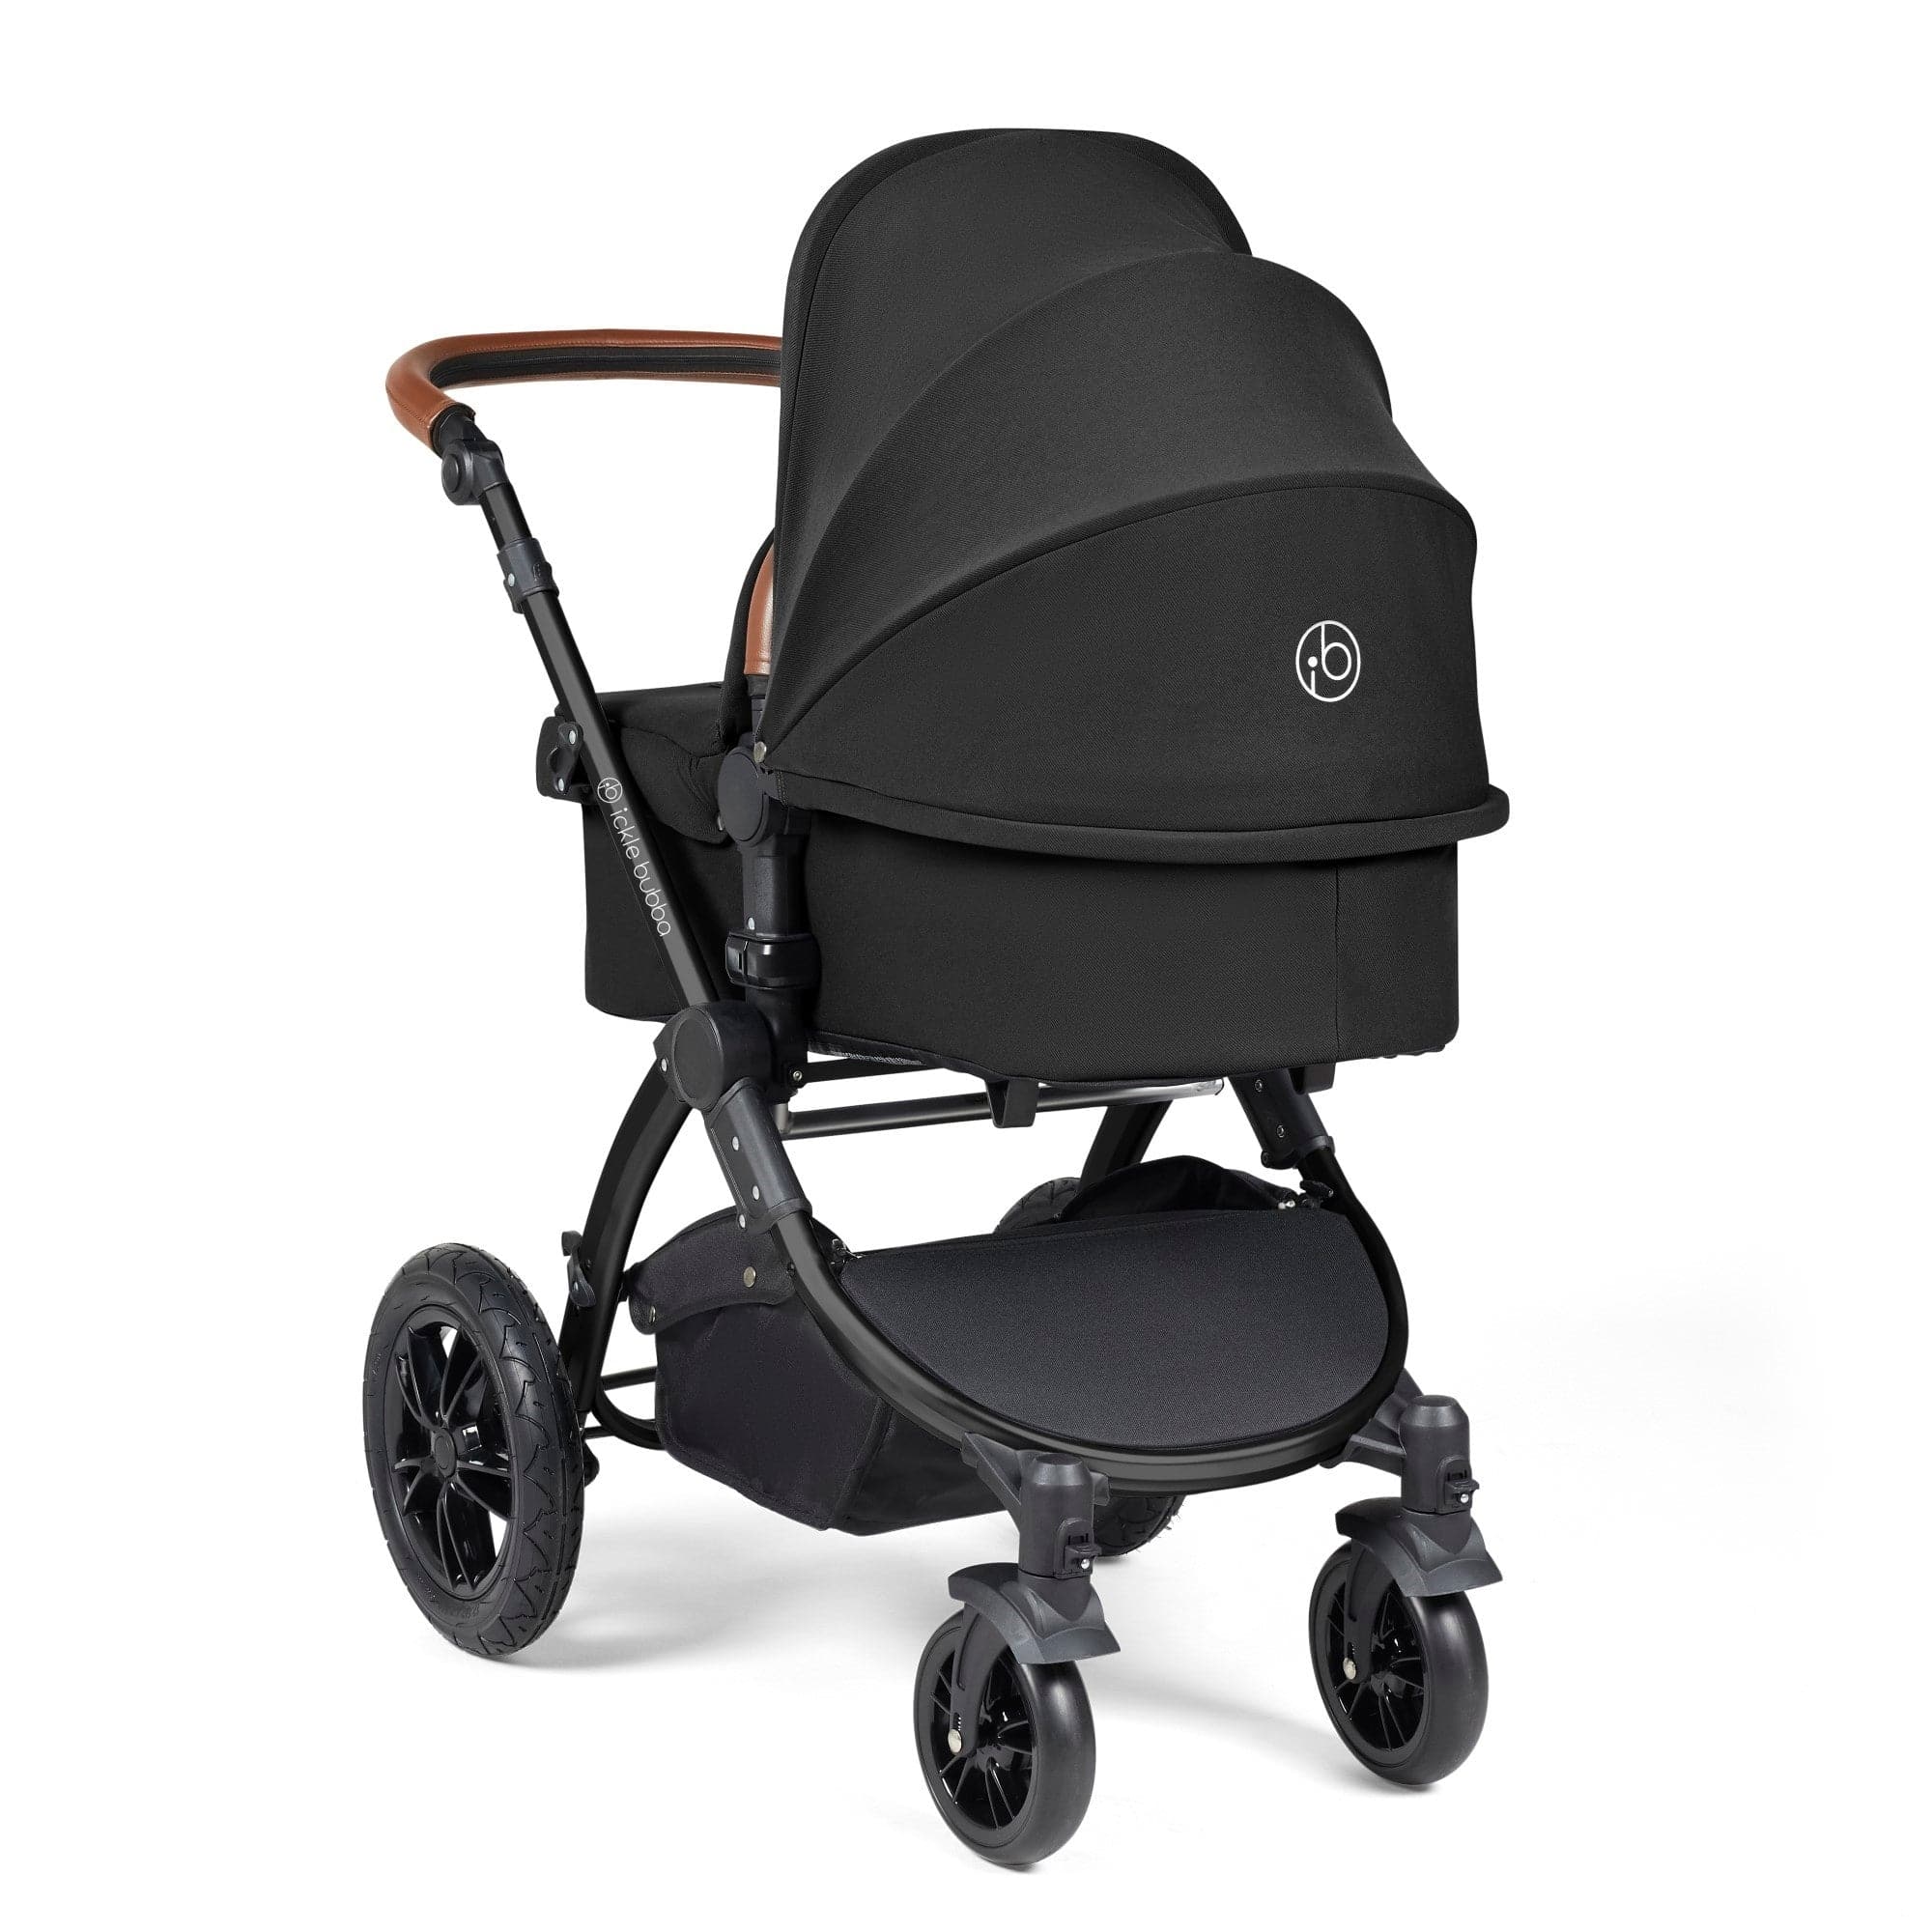 Ickle Bubba Stomp Luxe All-in-One I-Size Travel System With Isofix Base - Black / Midnight / Tan - For Your Little One